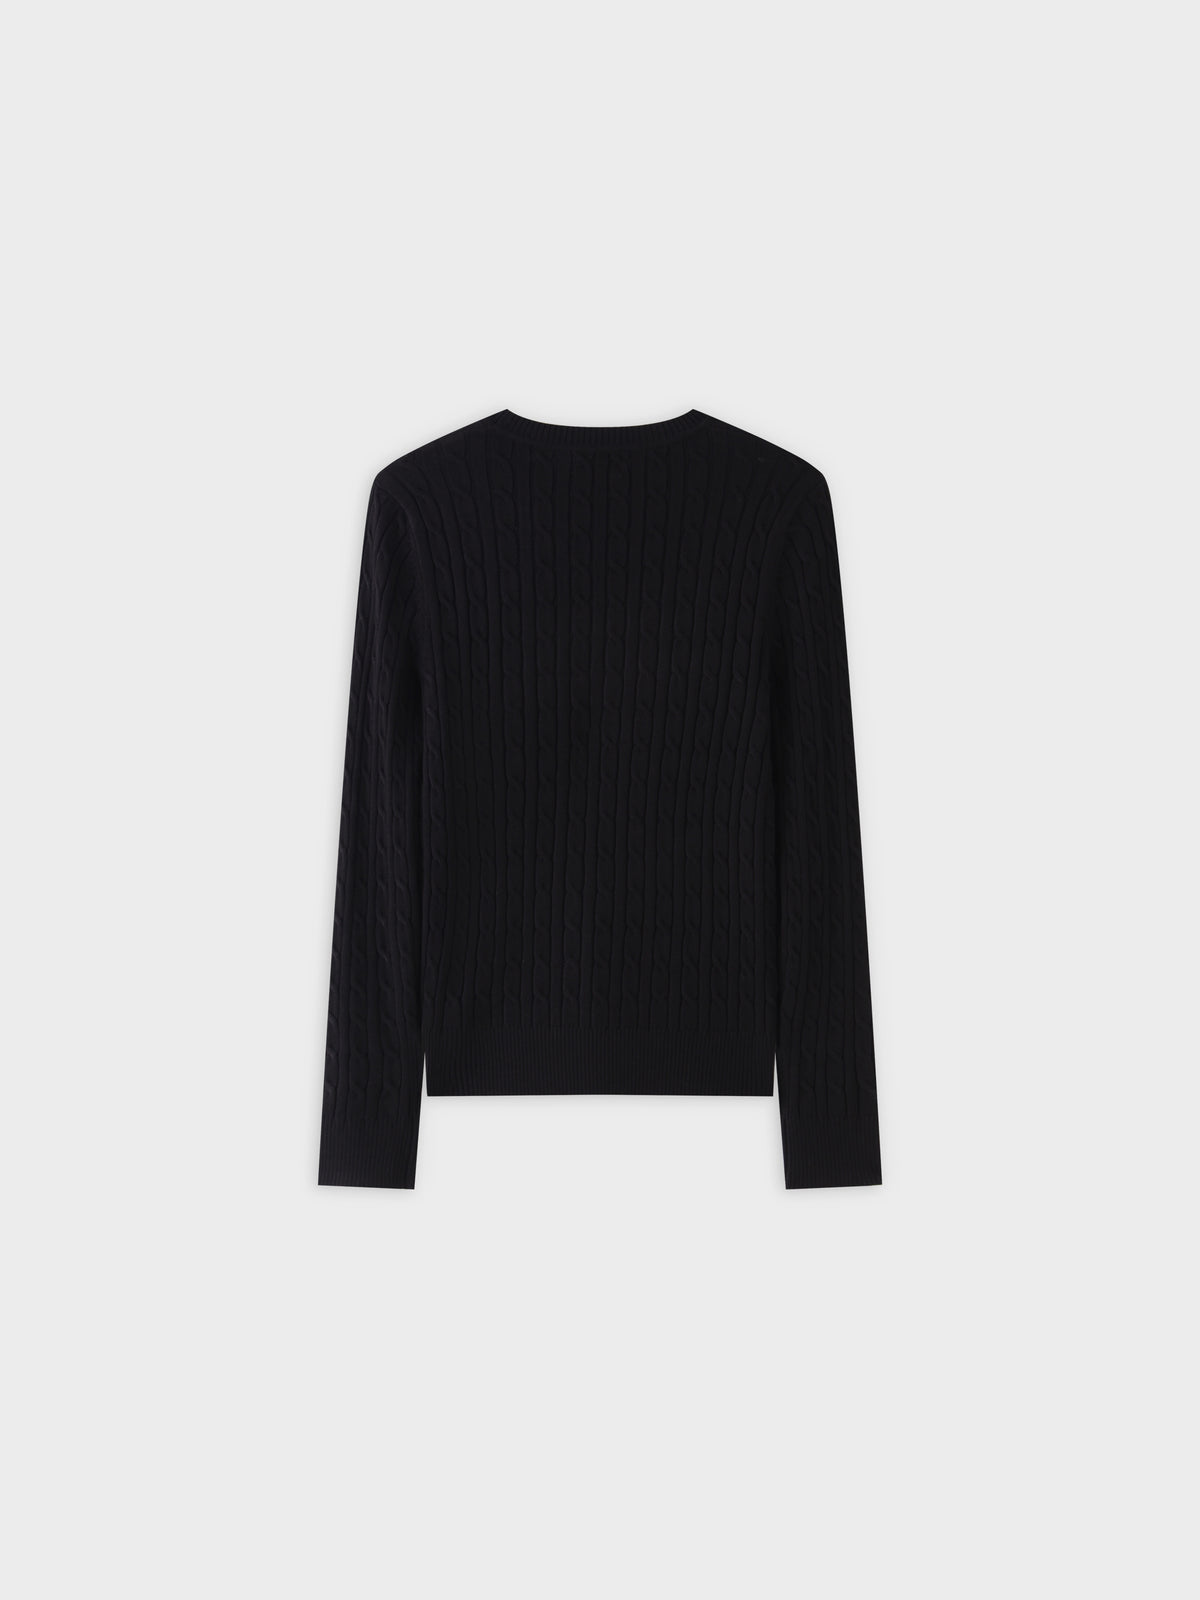 Knit Cable Sweater-Black